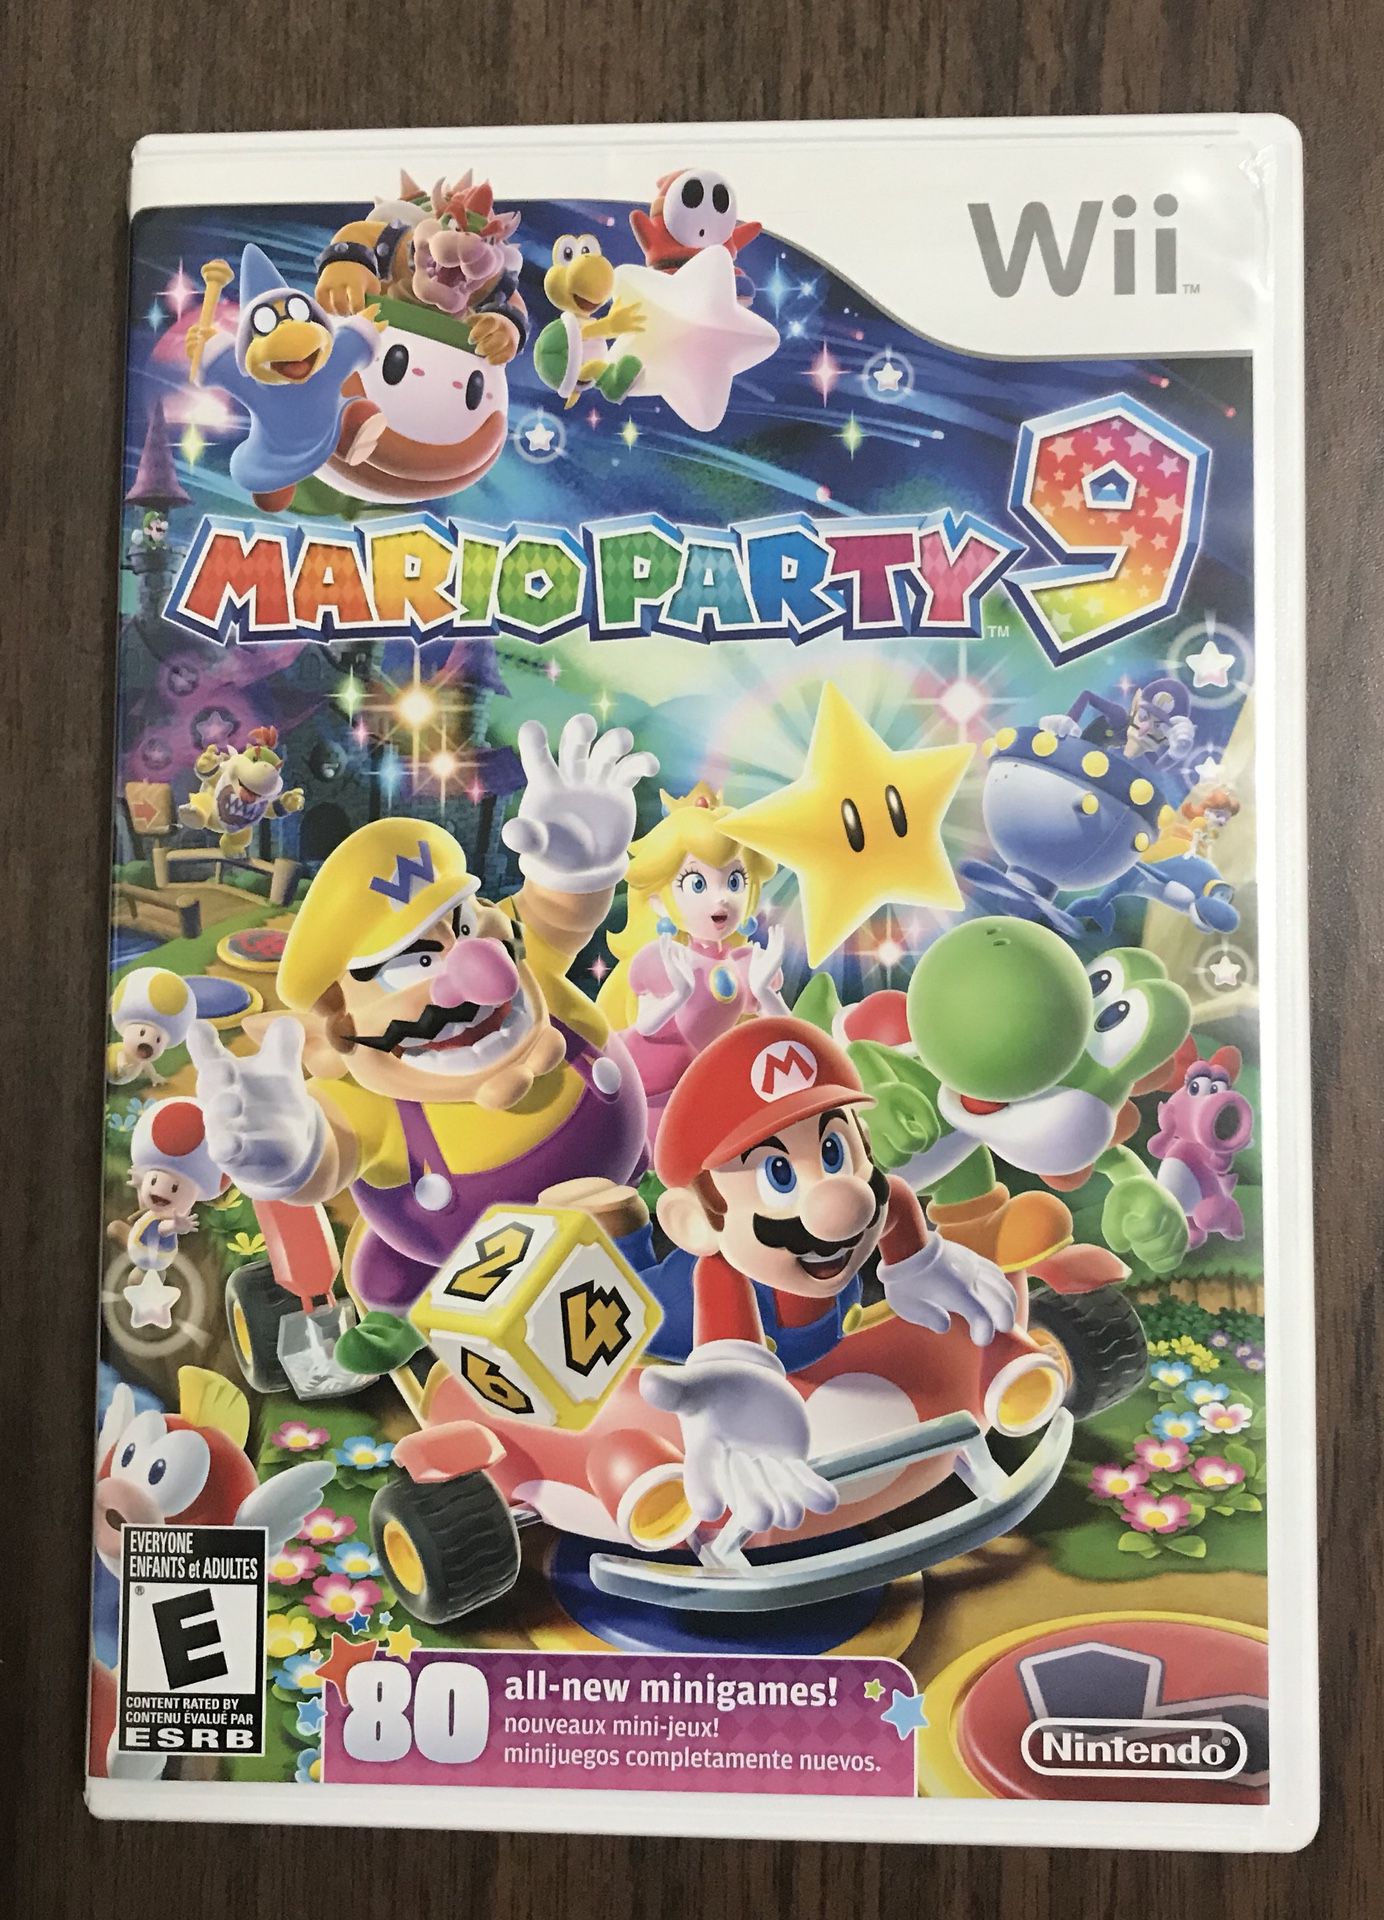 Mario Party 9 for Nintendo Wii game system nine